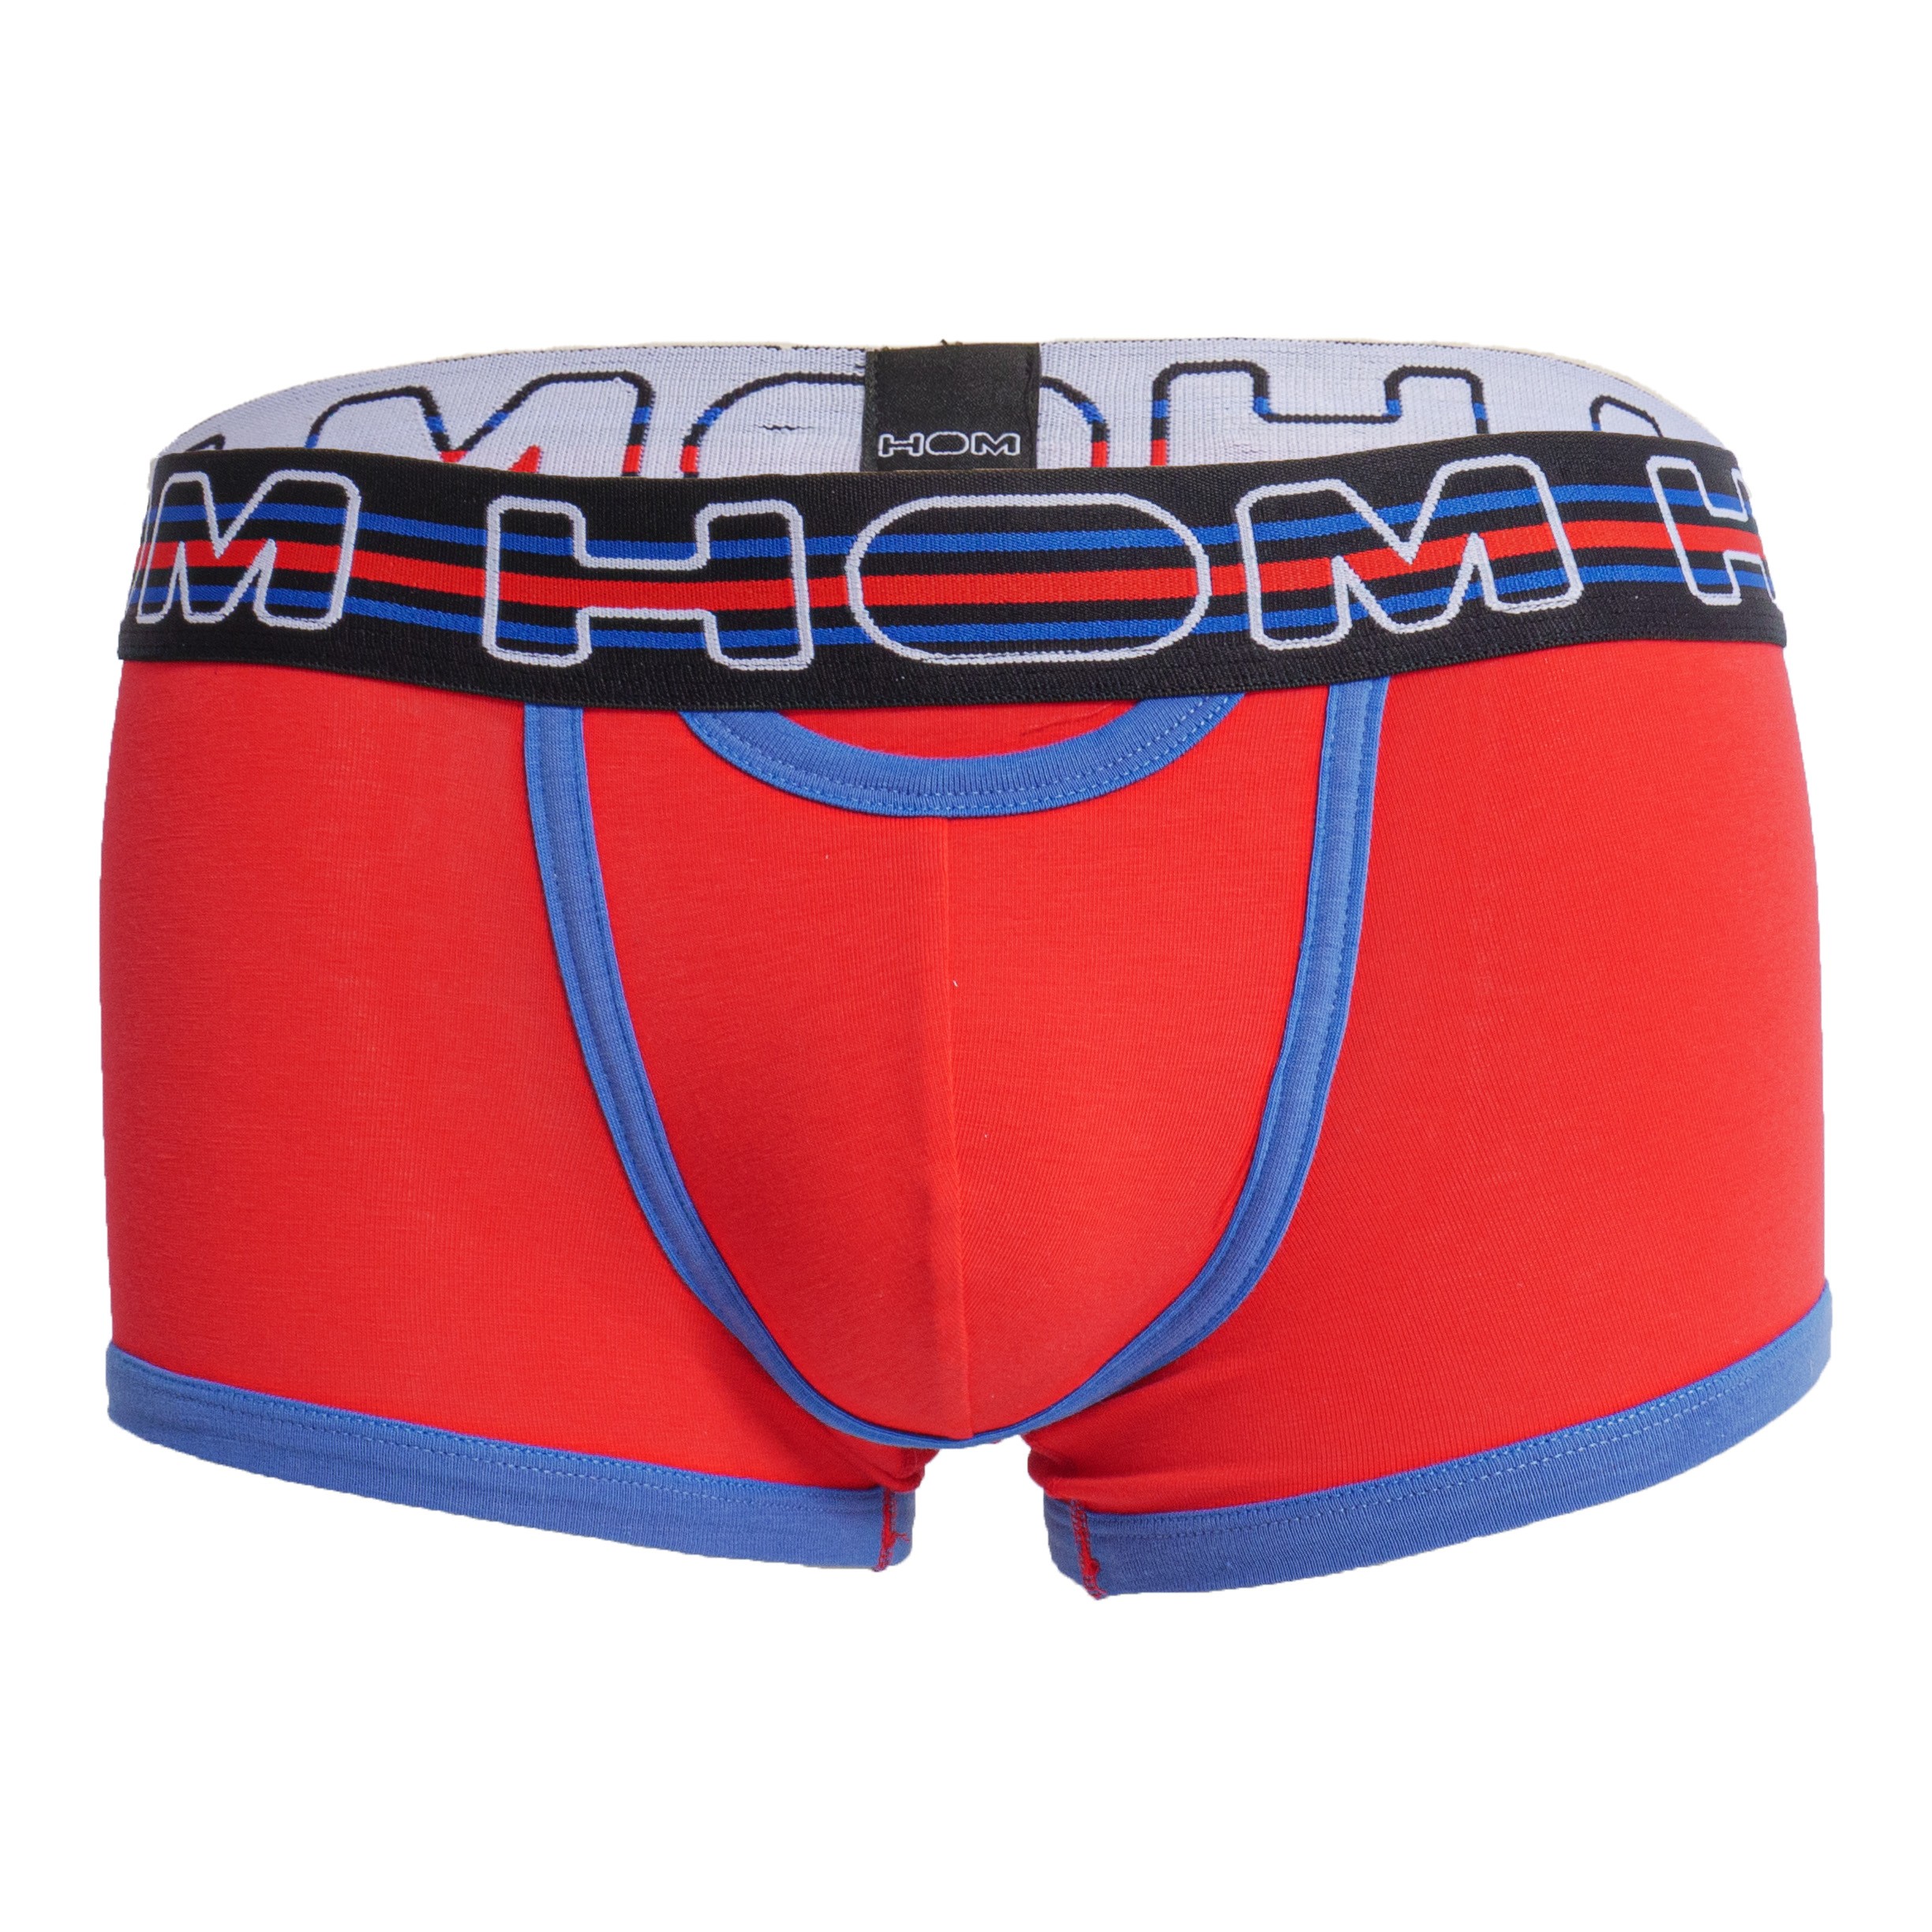 https://www.luniversdelhomme.com/84133/boxer-short-ho1-cotton-up-limited-edition-red.jpg